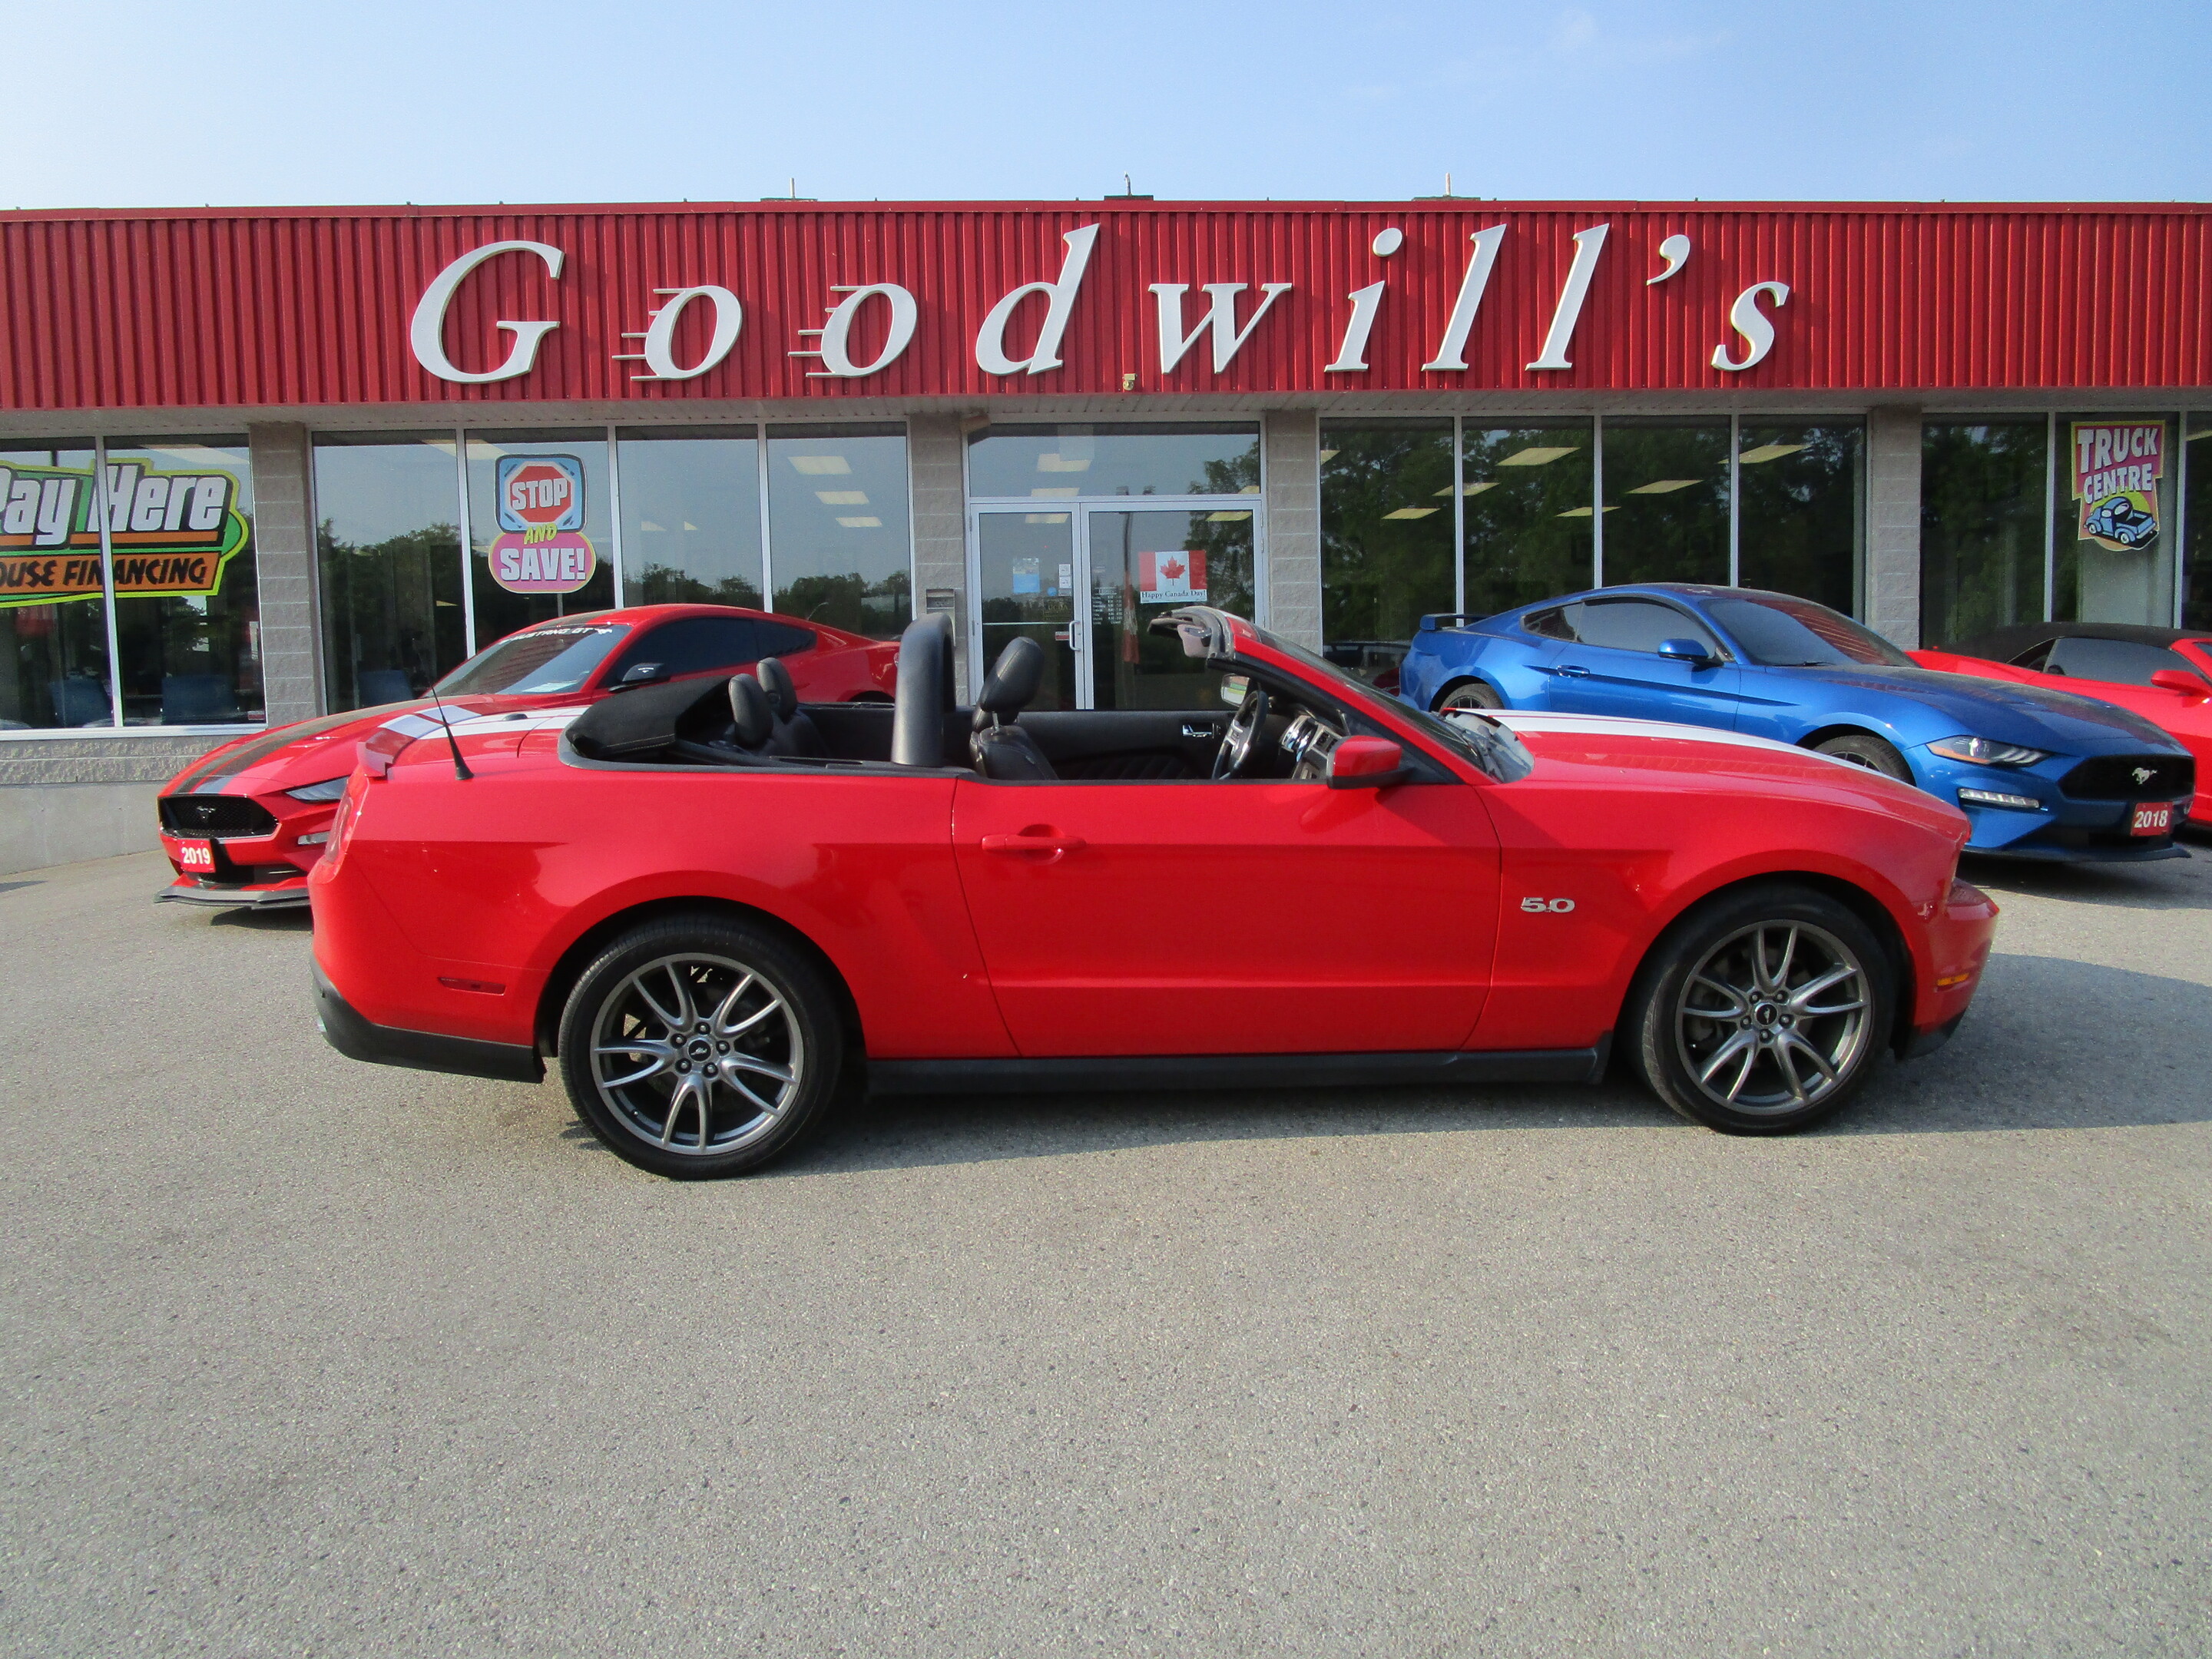 2012 Ford Mustang GT, 5 L, CLEAN CARFAX, CONVERTIBLE WITH LOW KM'S!